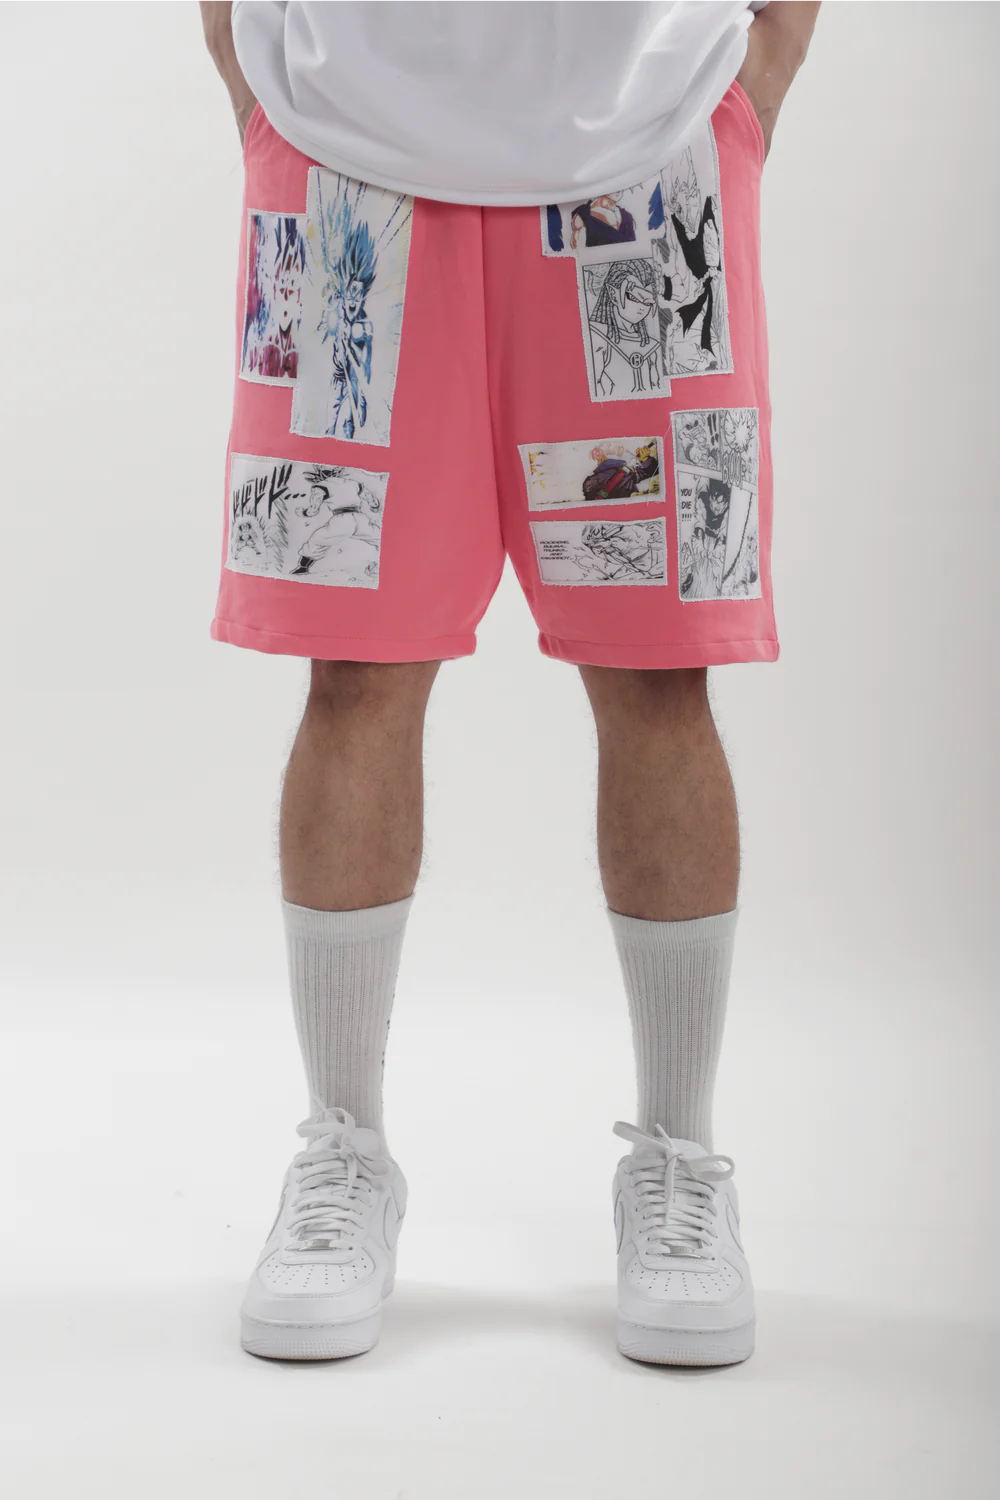 DBZ Shorts, a product by TOFFLE